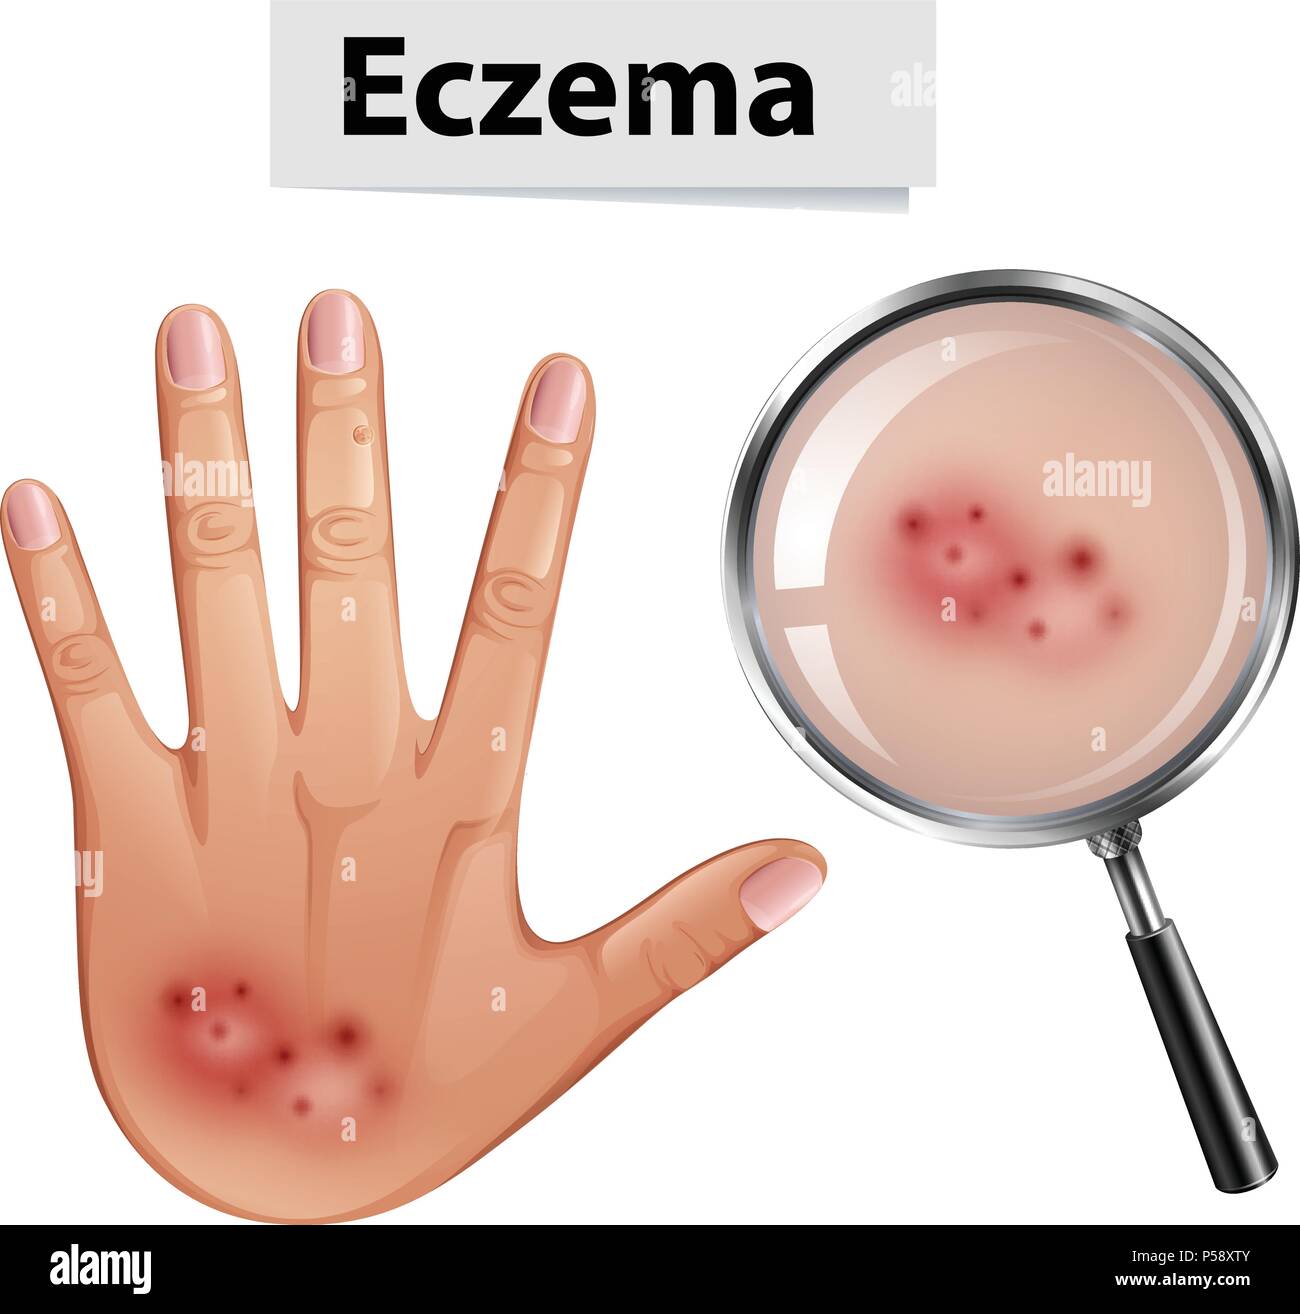 A Human Hand with Eczema illustration Stock Vector